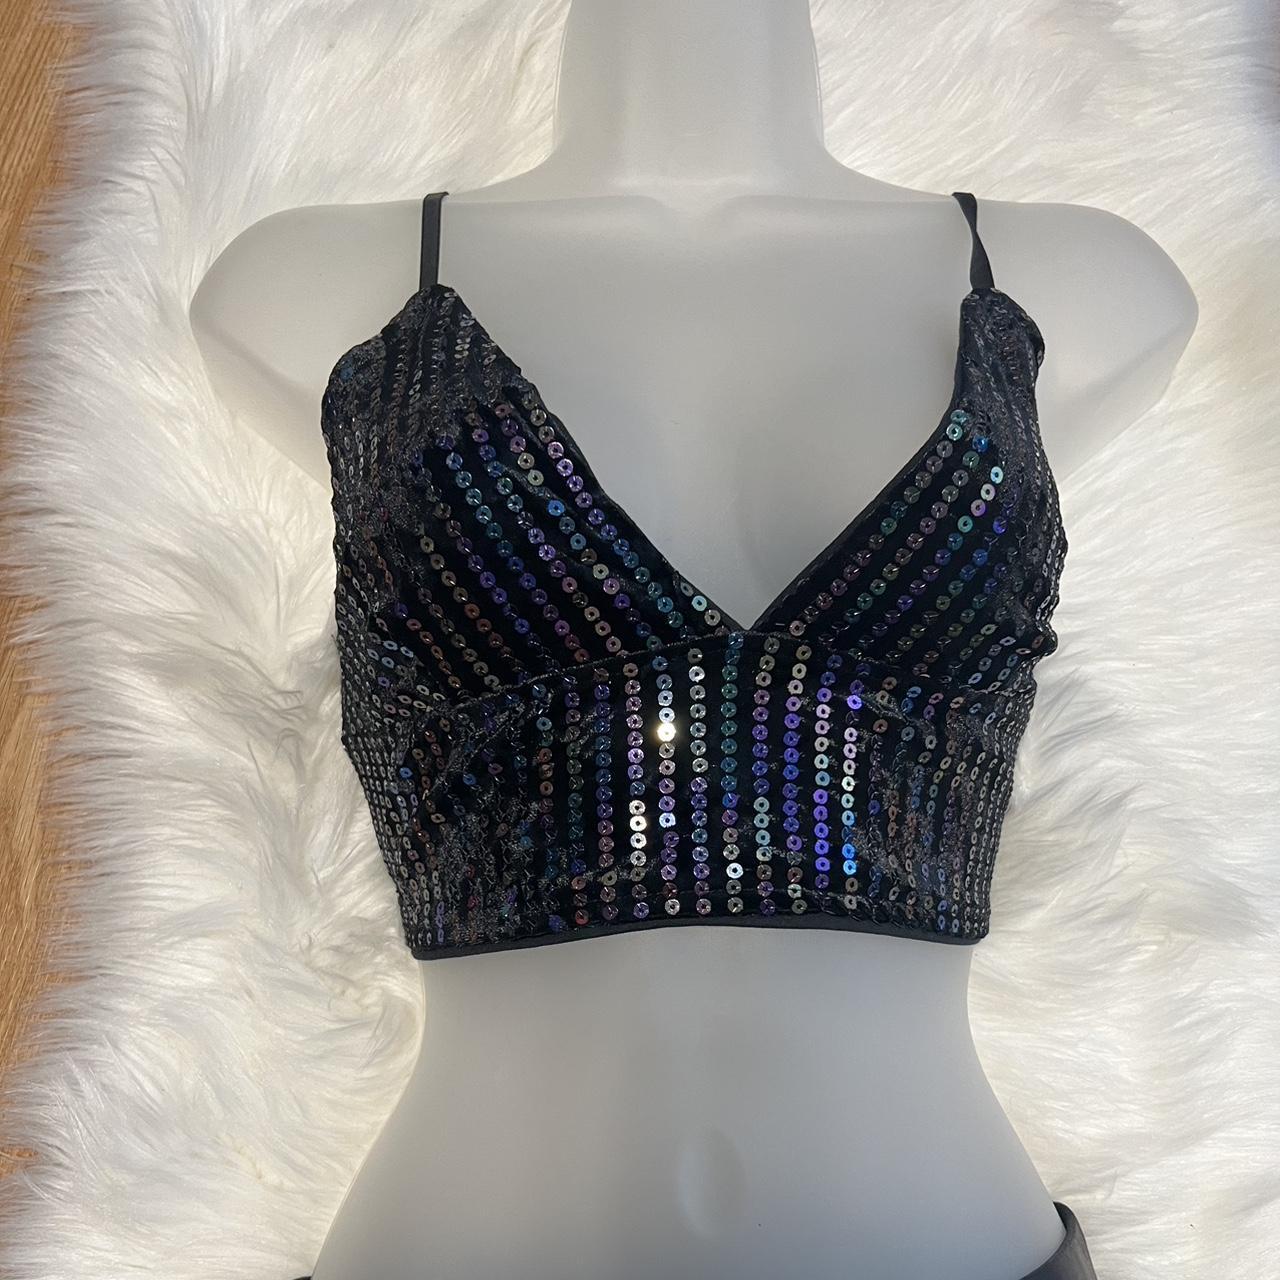 Cute going out crop top! Sequin with velvet material